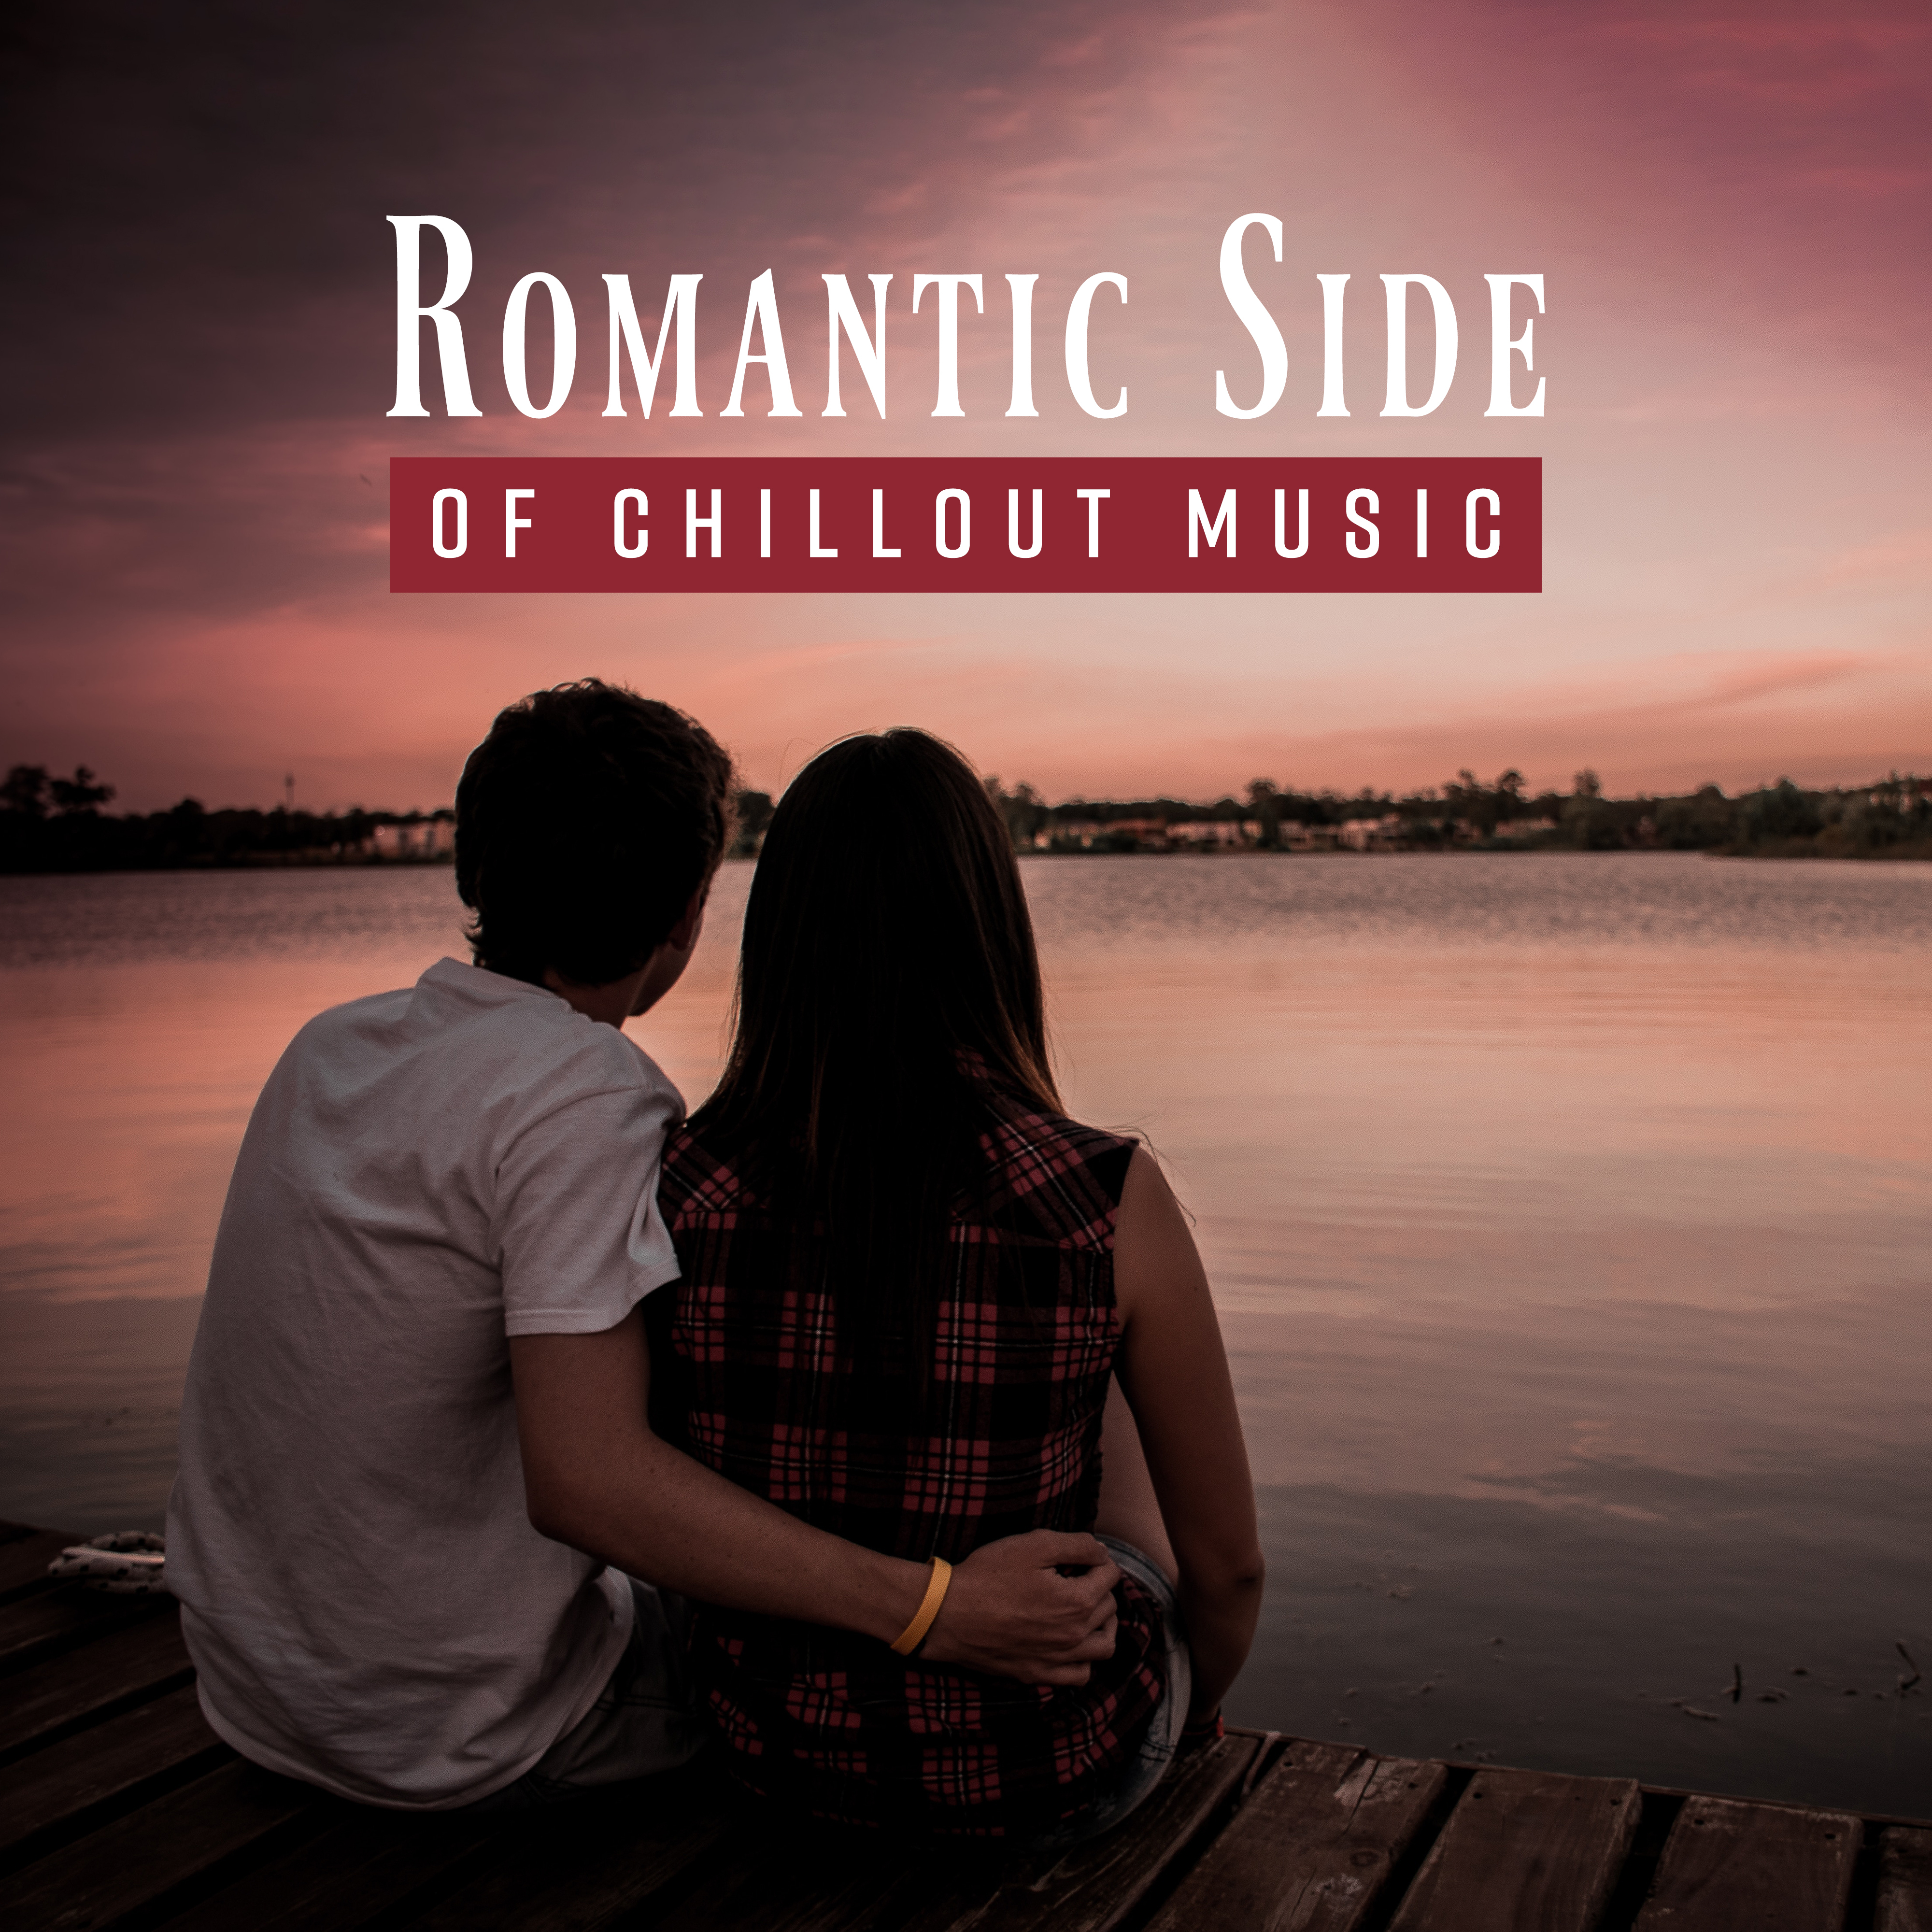 Romantic Side of Chillout Music